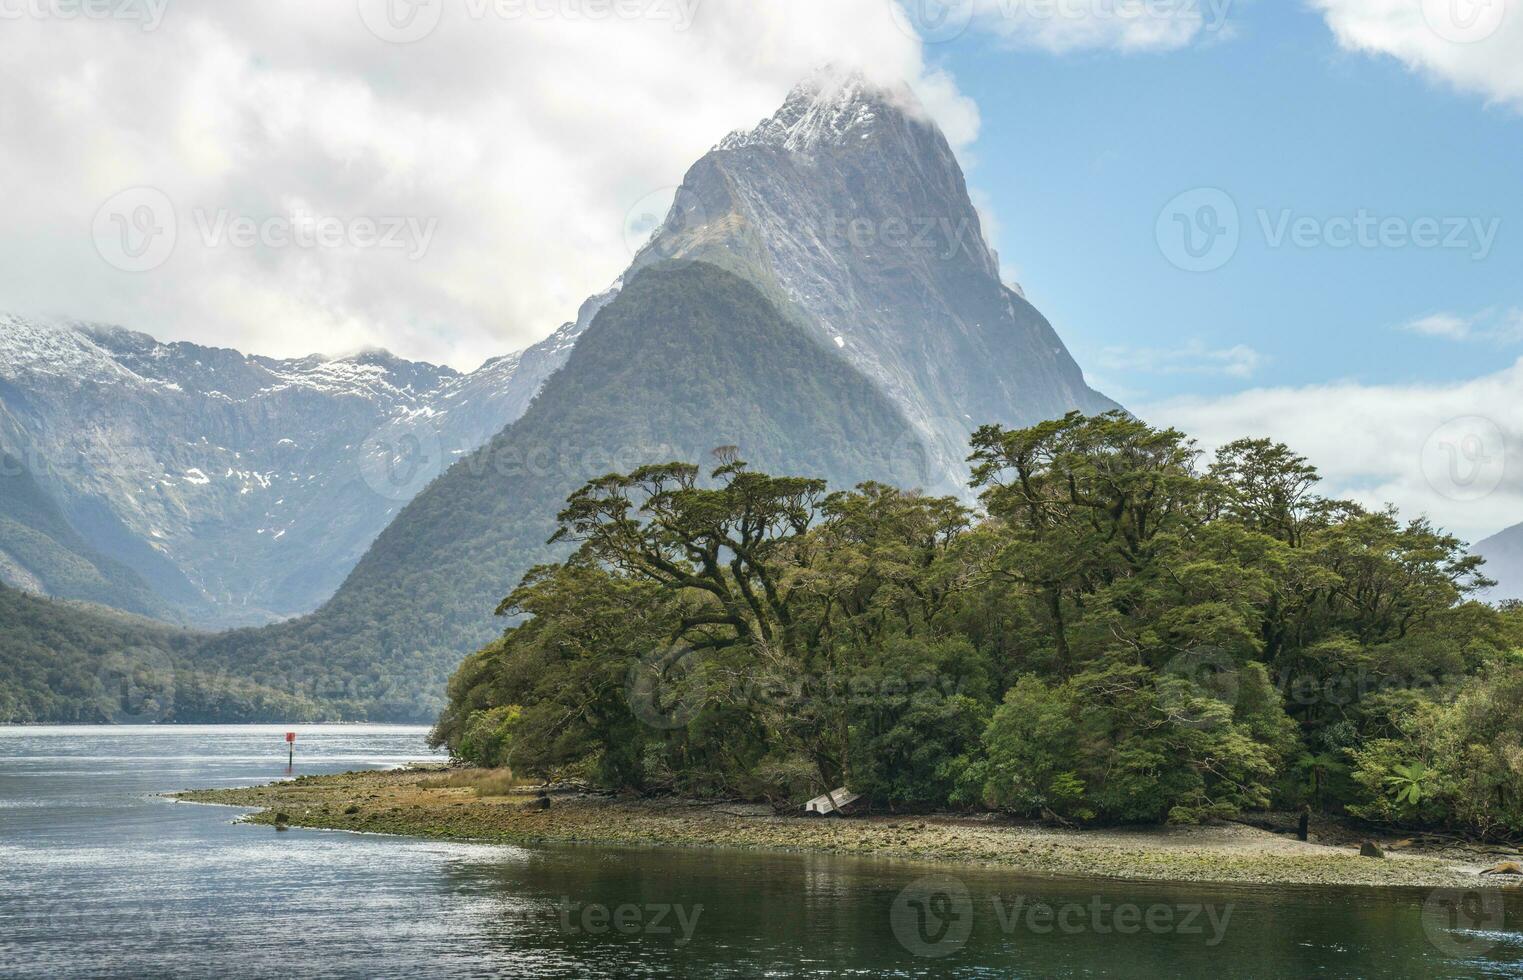 Mitre Peak is an iconic mountain in the South Island of New Zealand, located on the shore of Milford Sound. photo